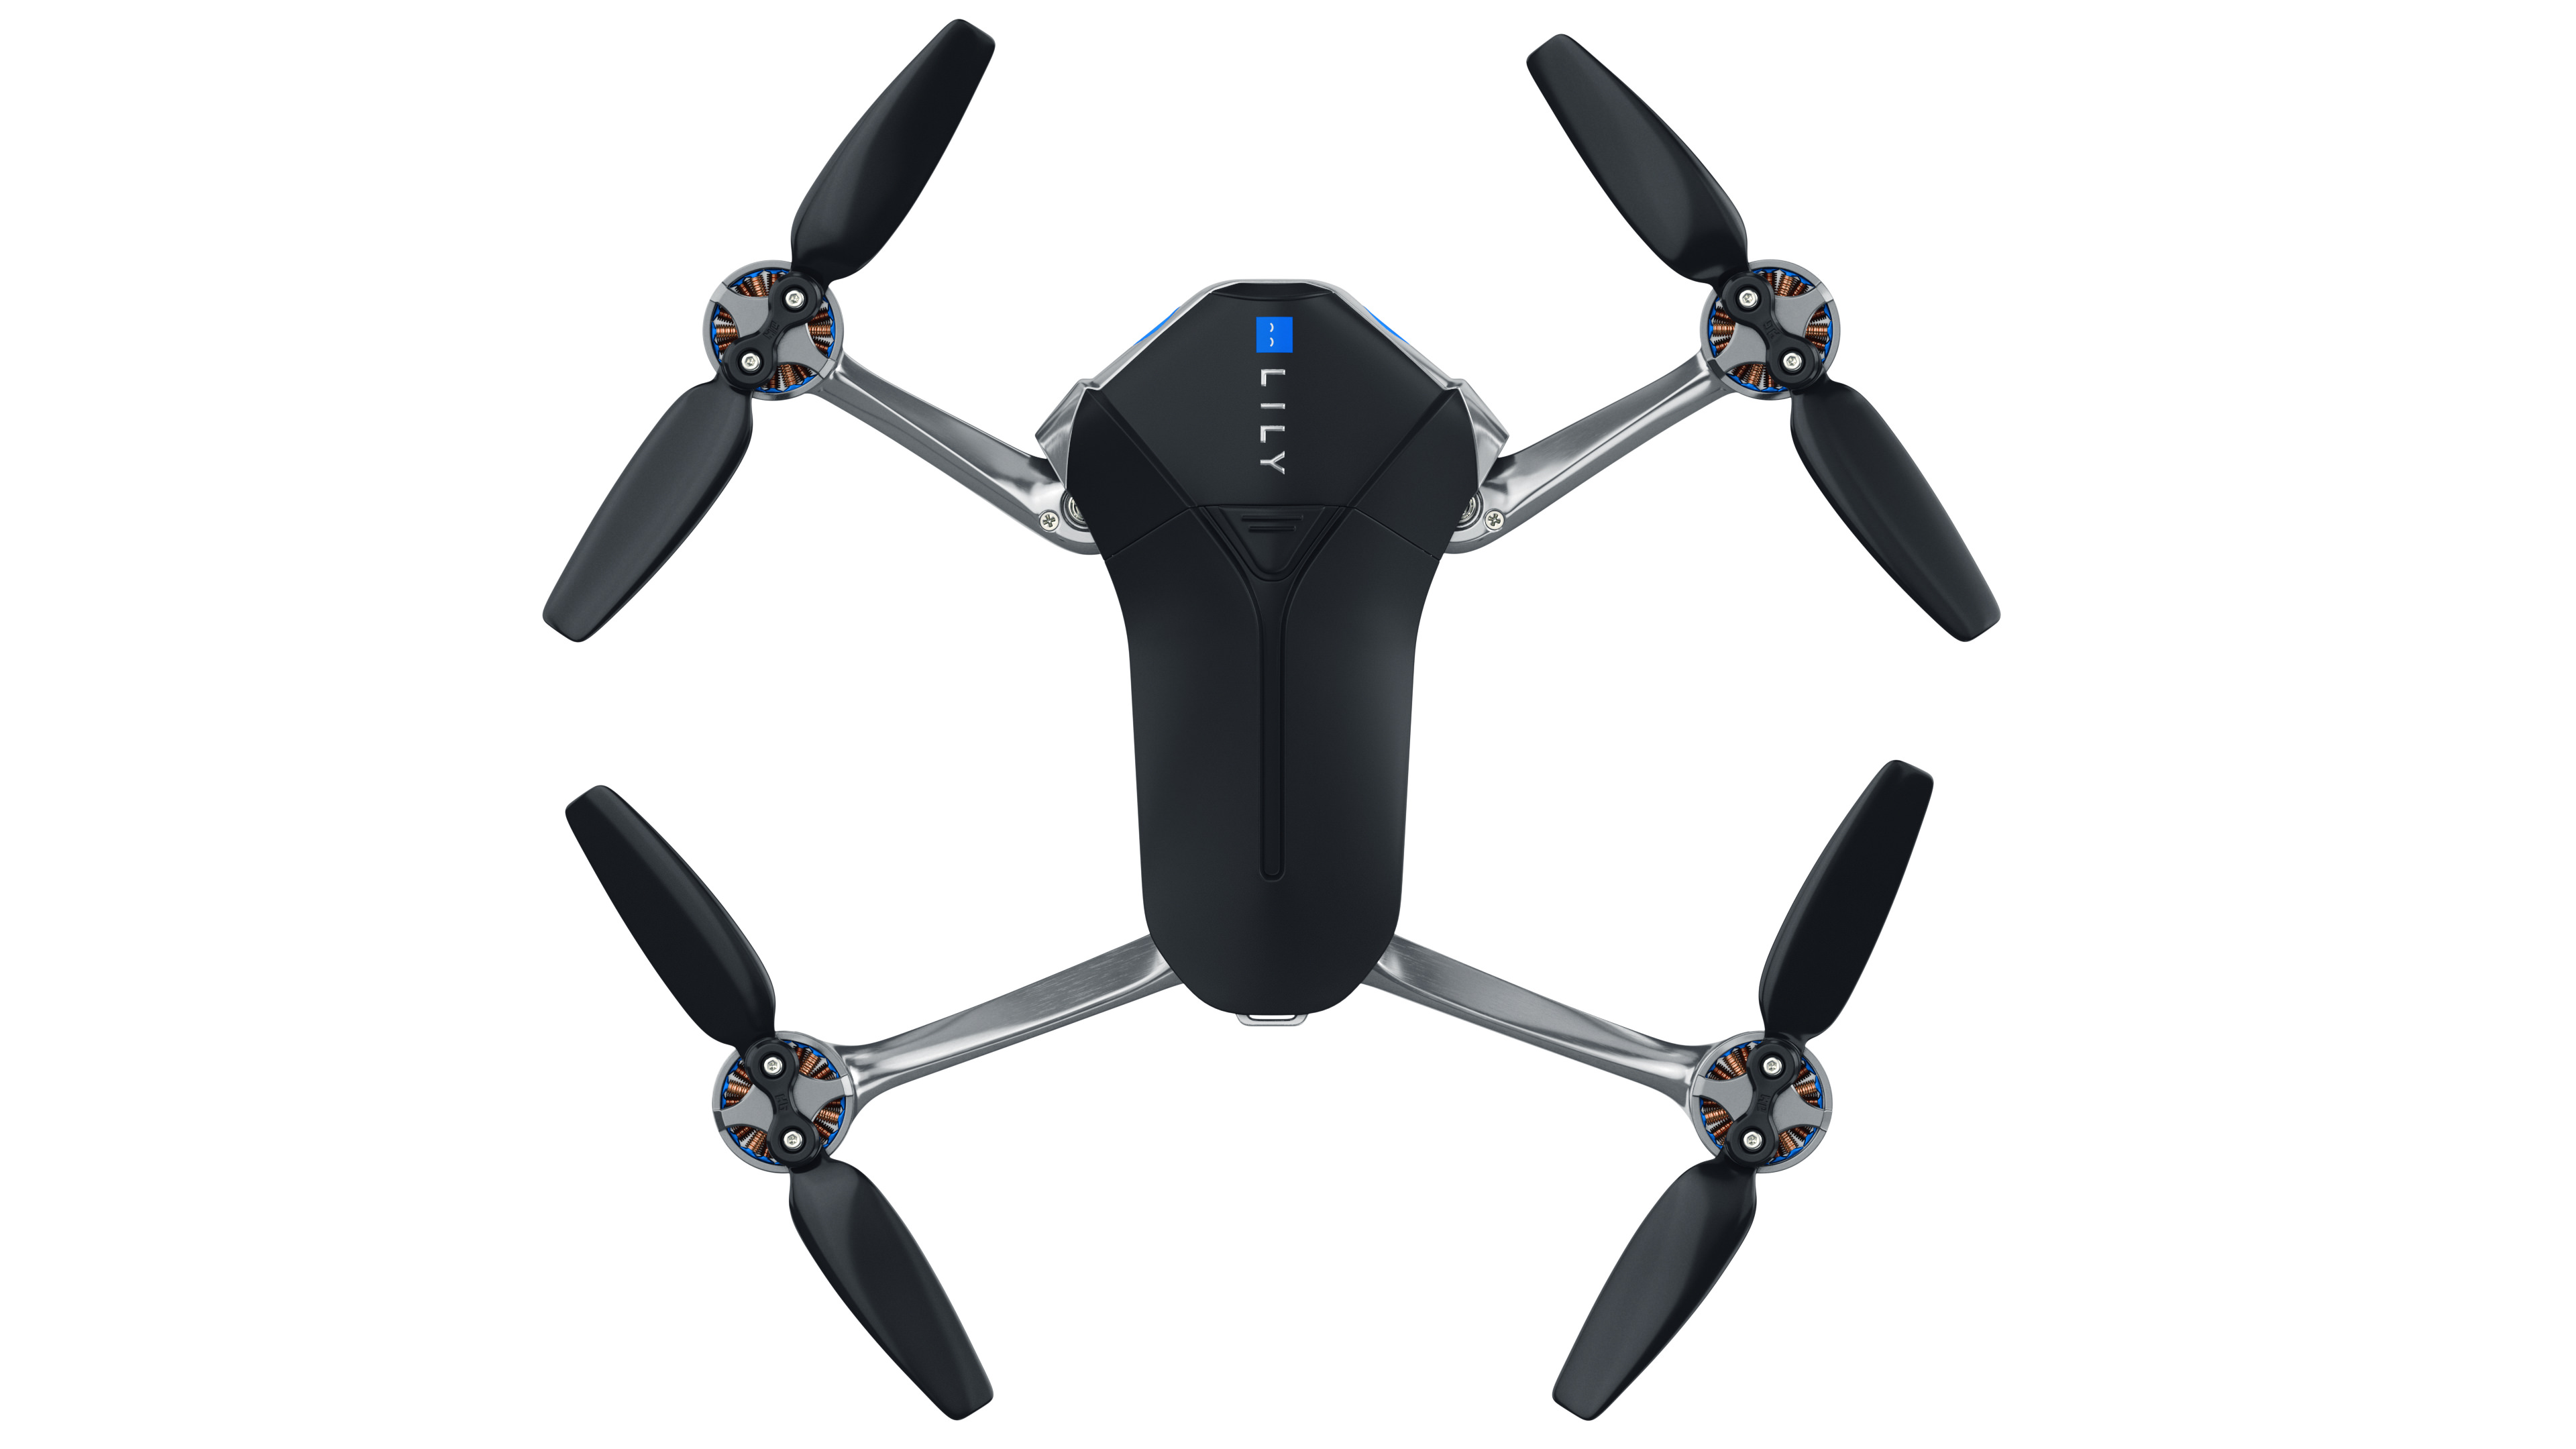 The Lily drone is dead. Long live the Lily Drone!